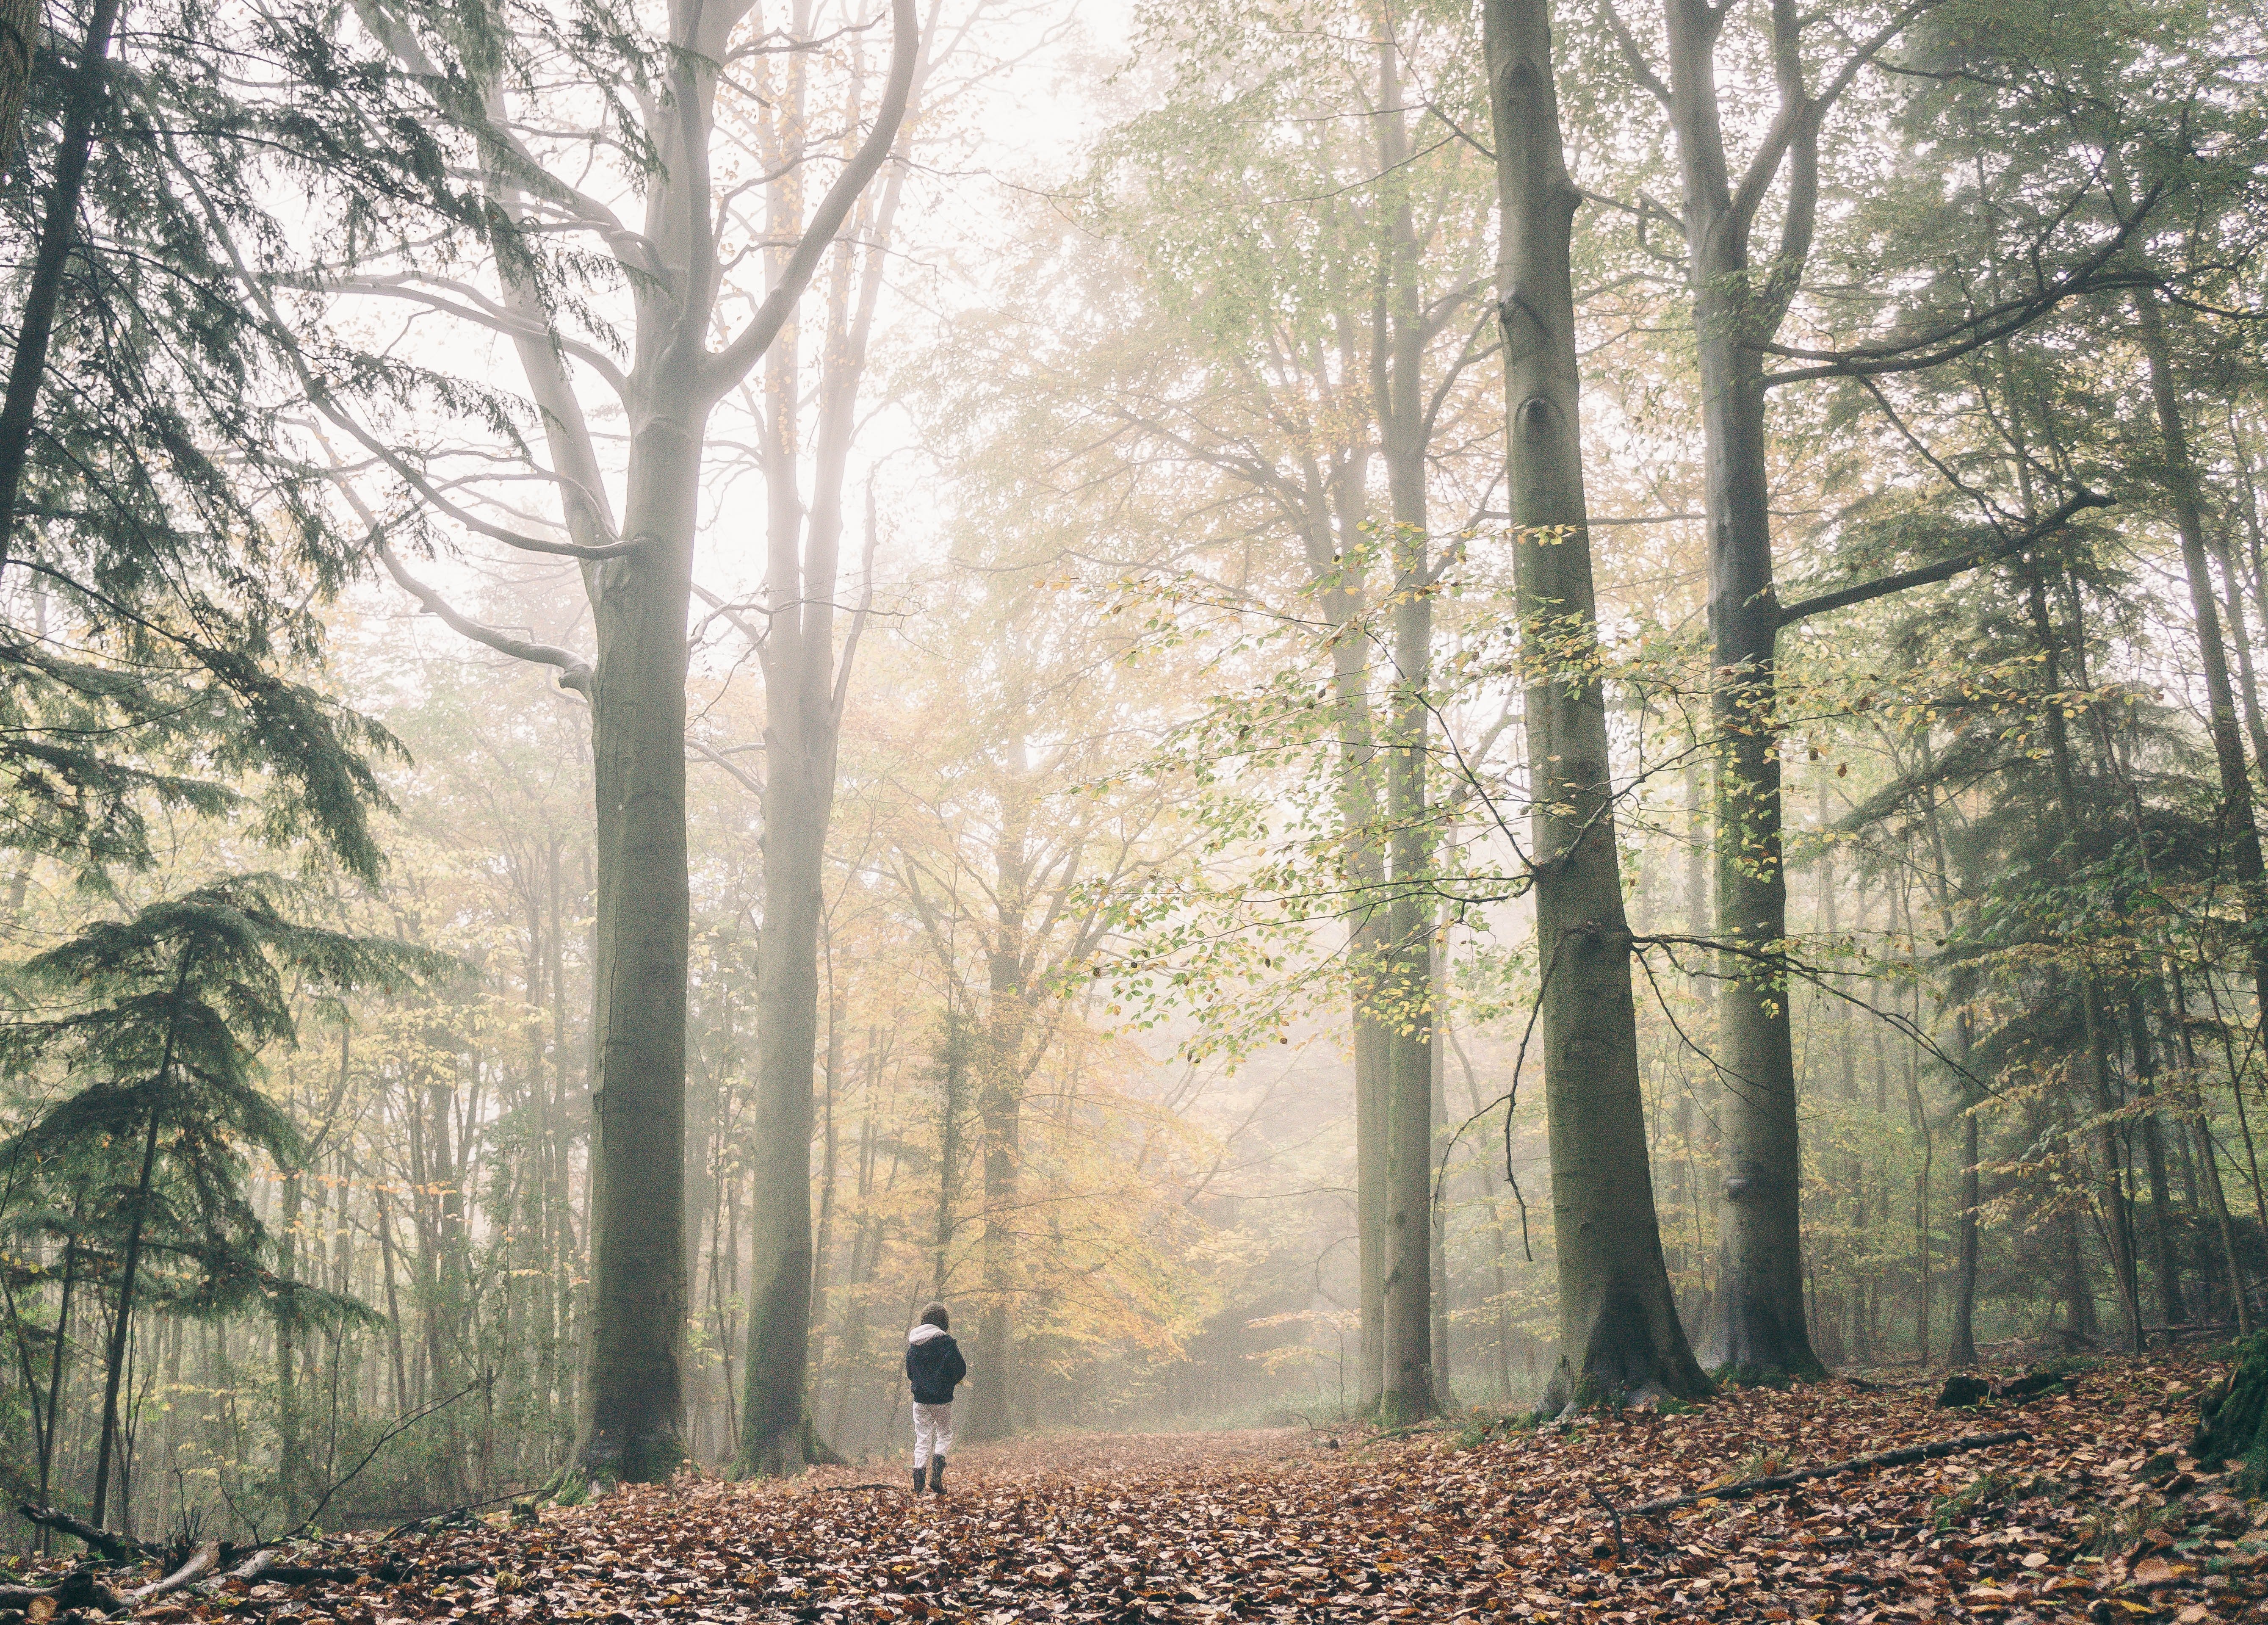 Justin's parents had strictly prohibited him from going to the woods near their house. | Source: Unsplash